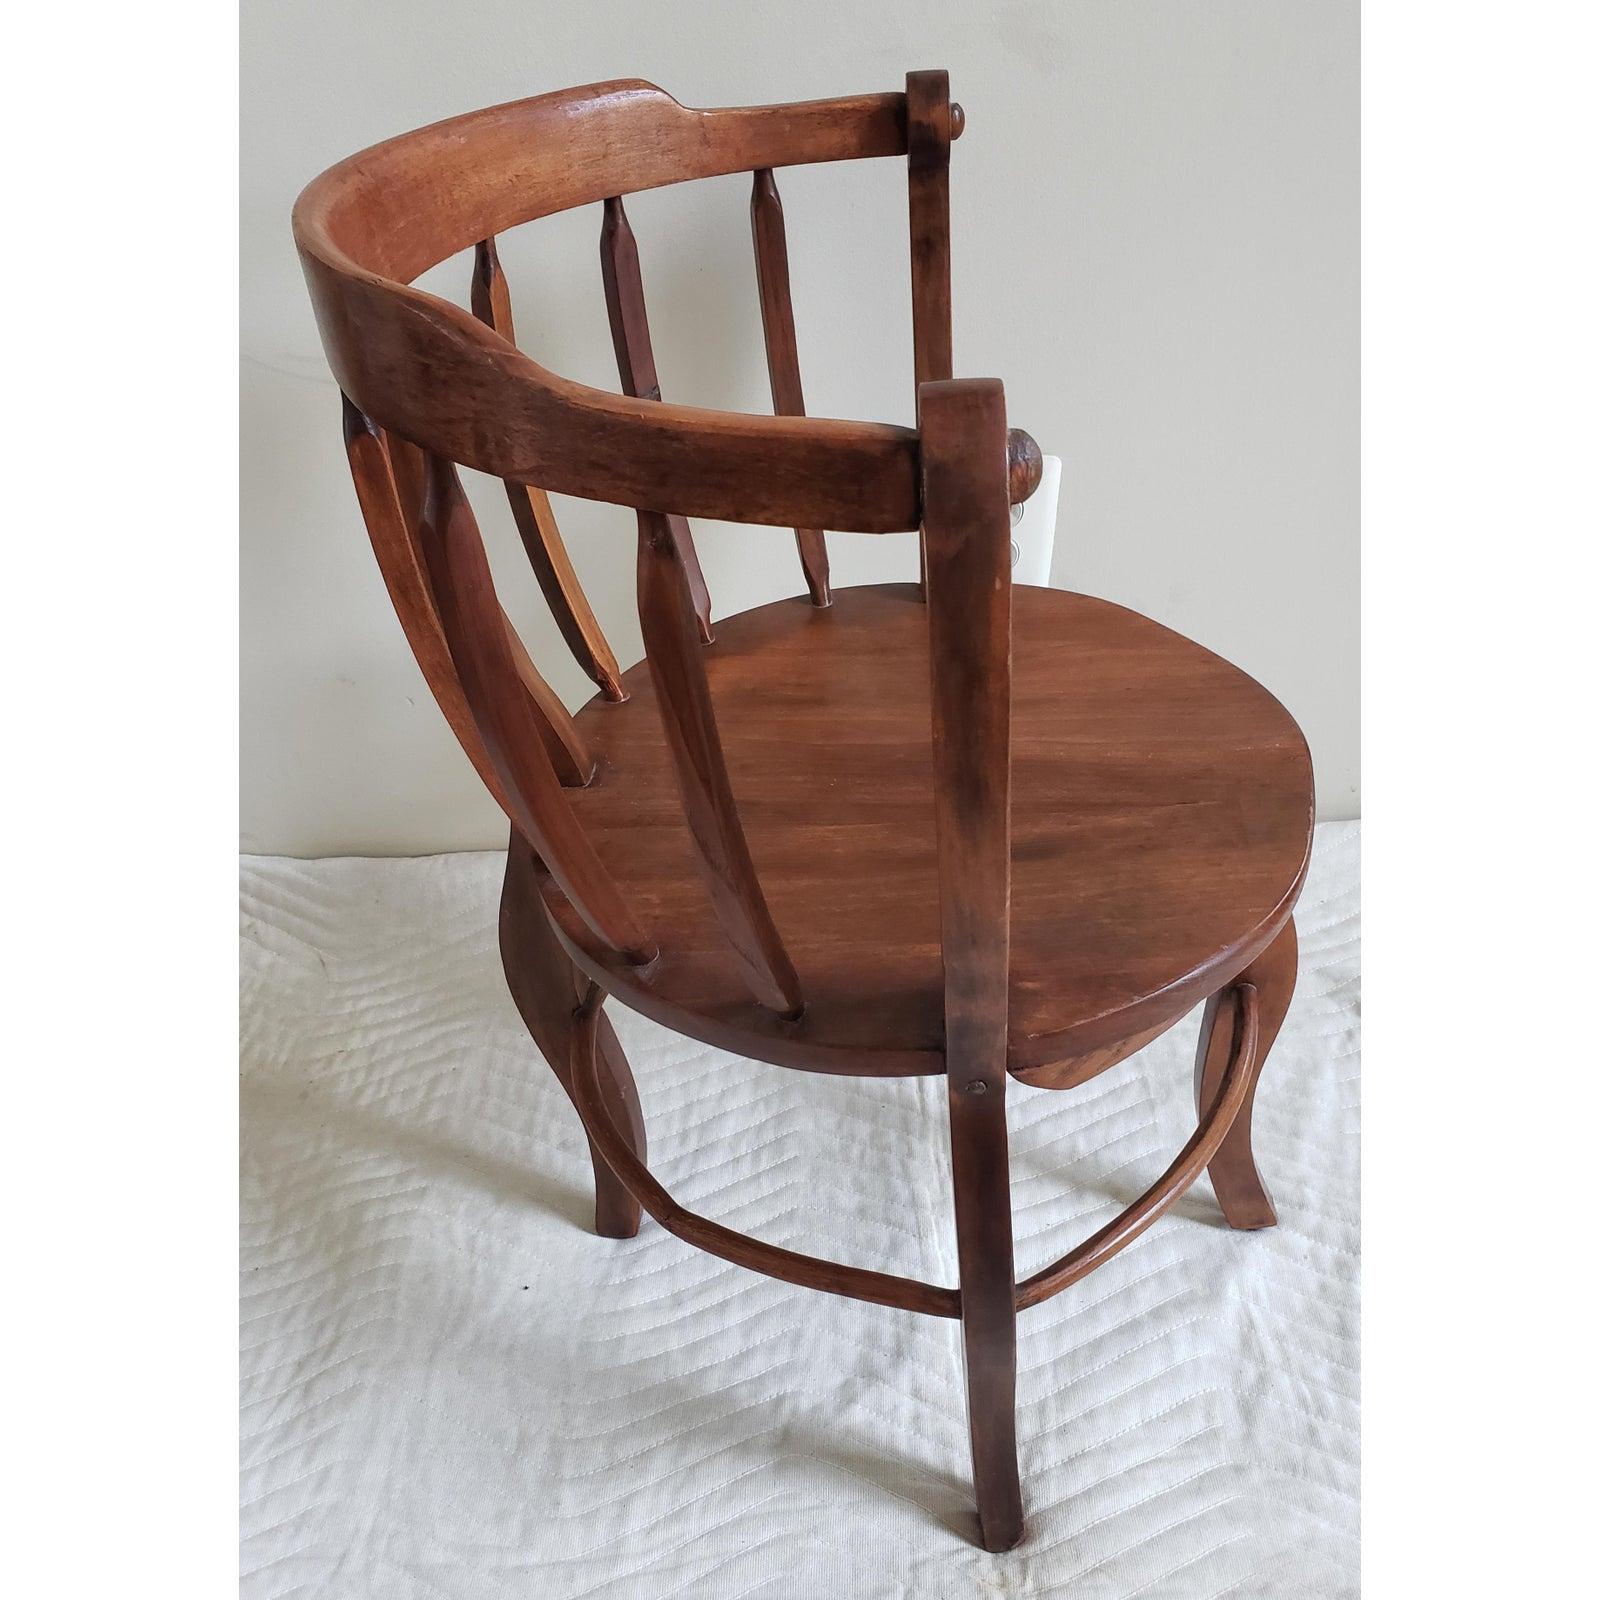 old round chair